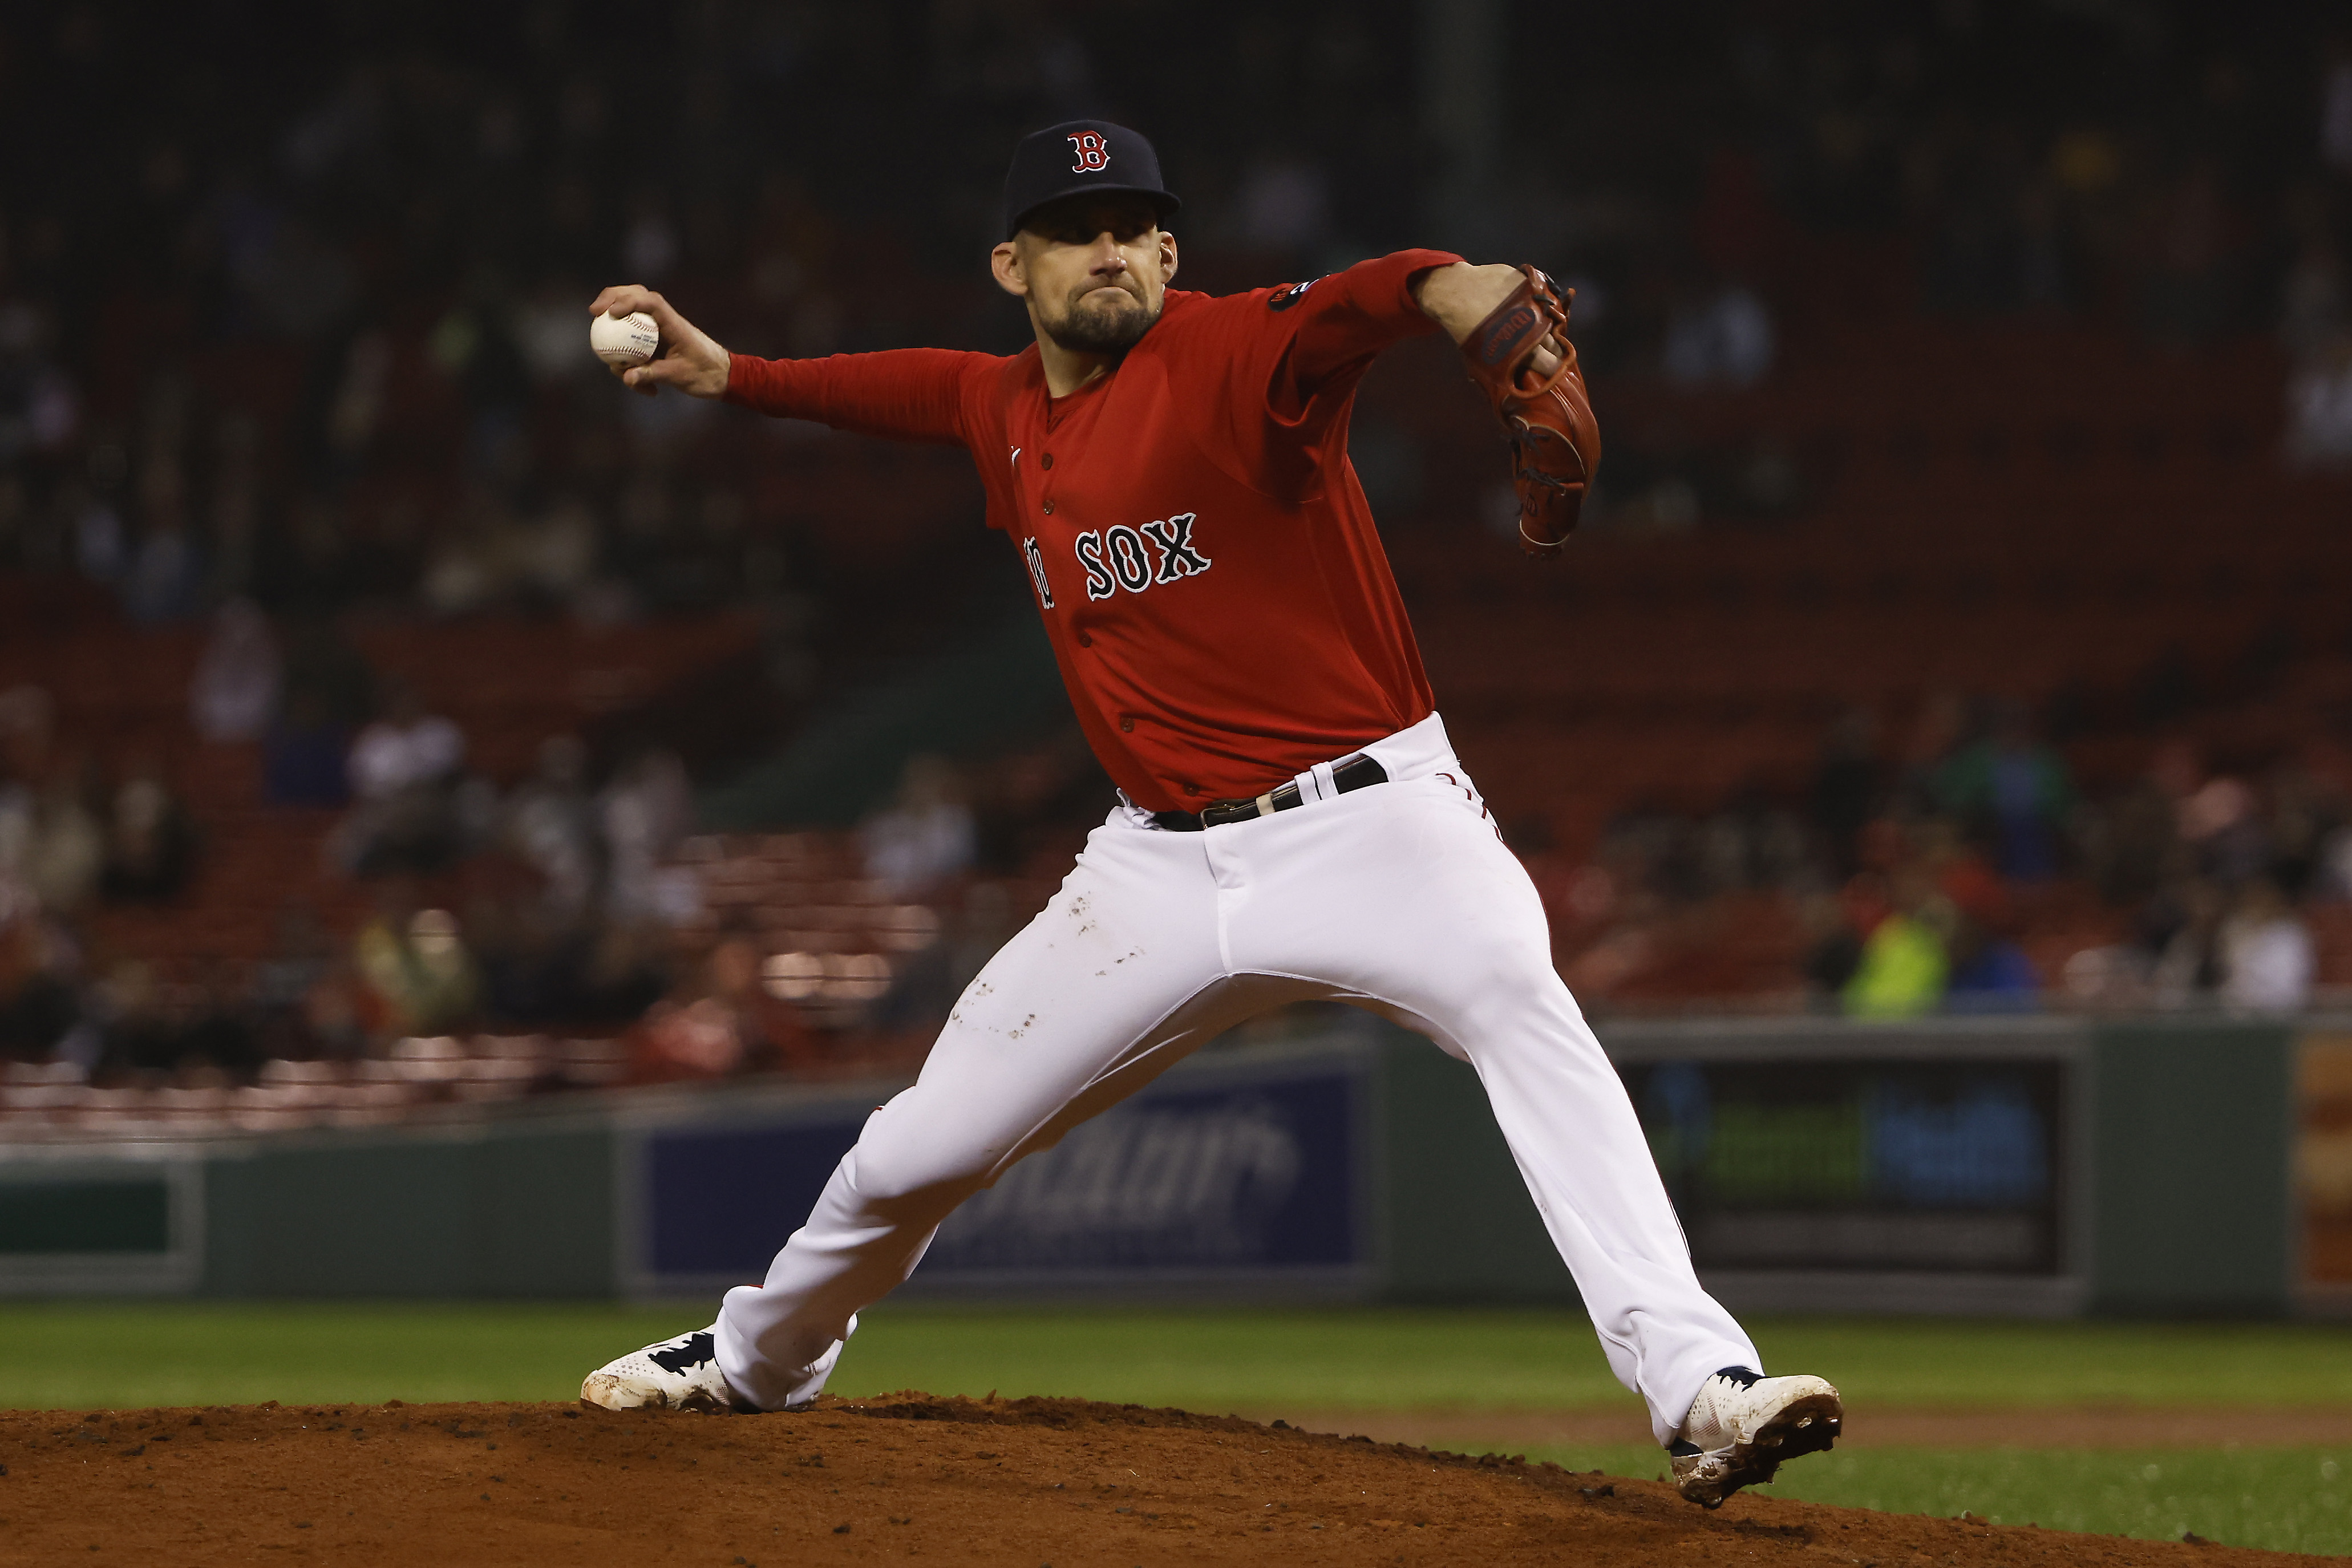 Red Sox starter Nathan Eovaldi gives up 5 HRs in second inning to Astros -  The Boston Globe